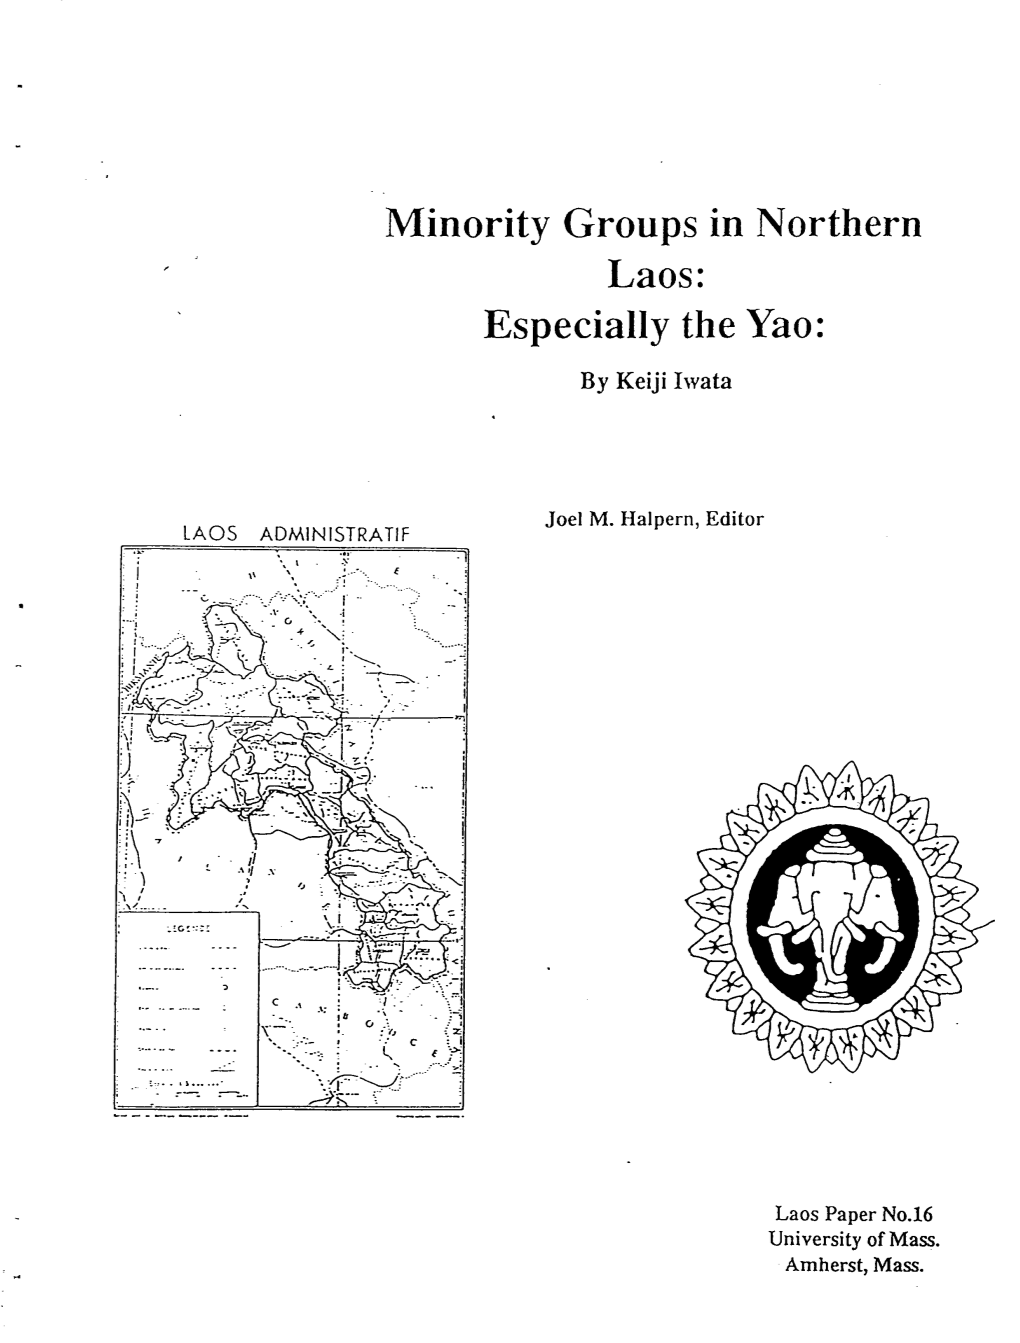 Minority Groups in Northern Laos: Especially the Yao: by Keiji Iwata